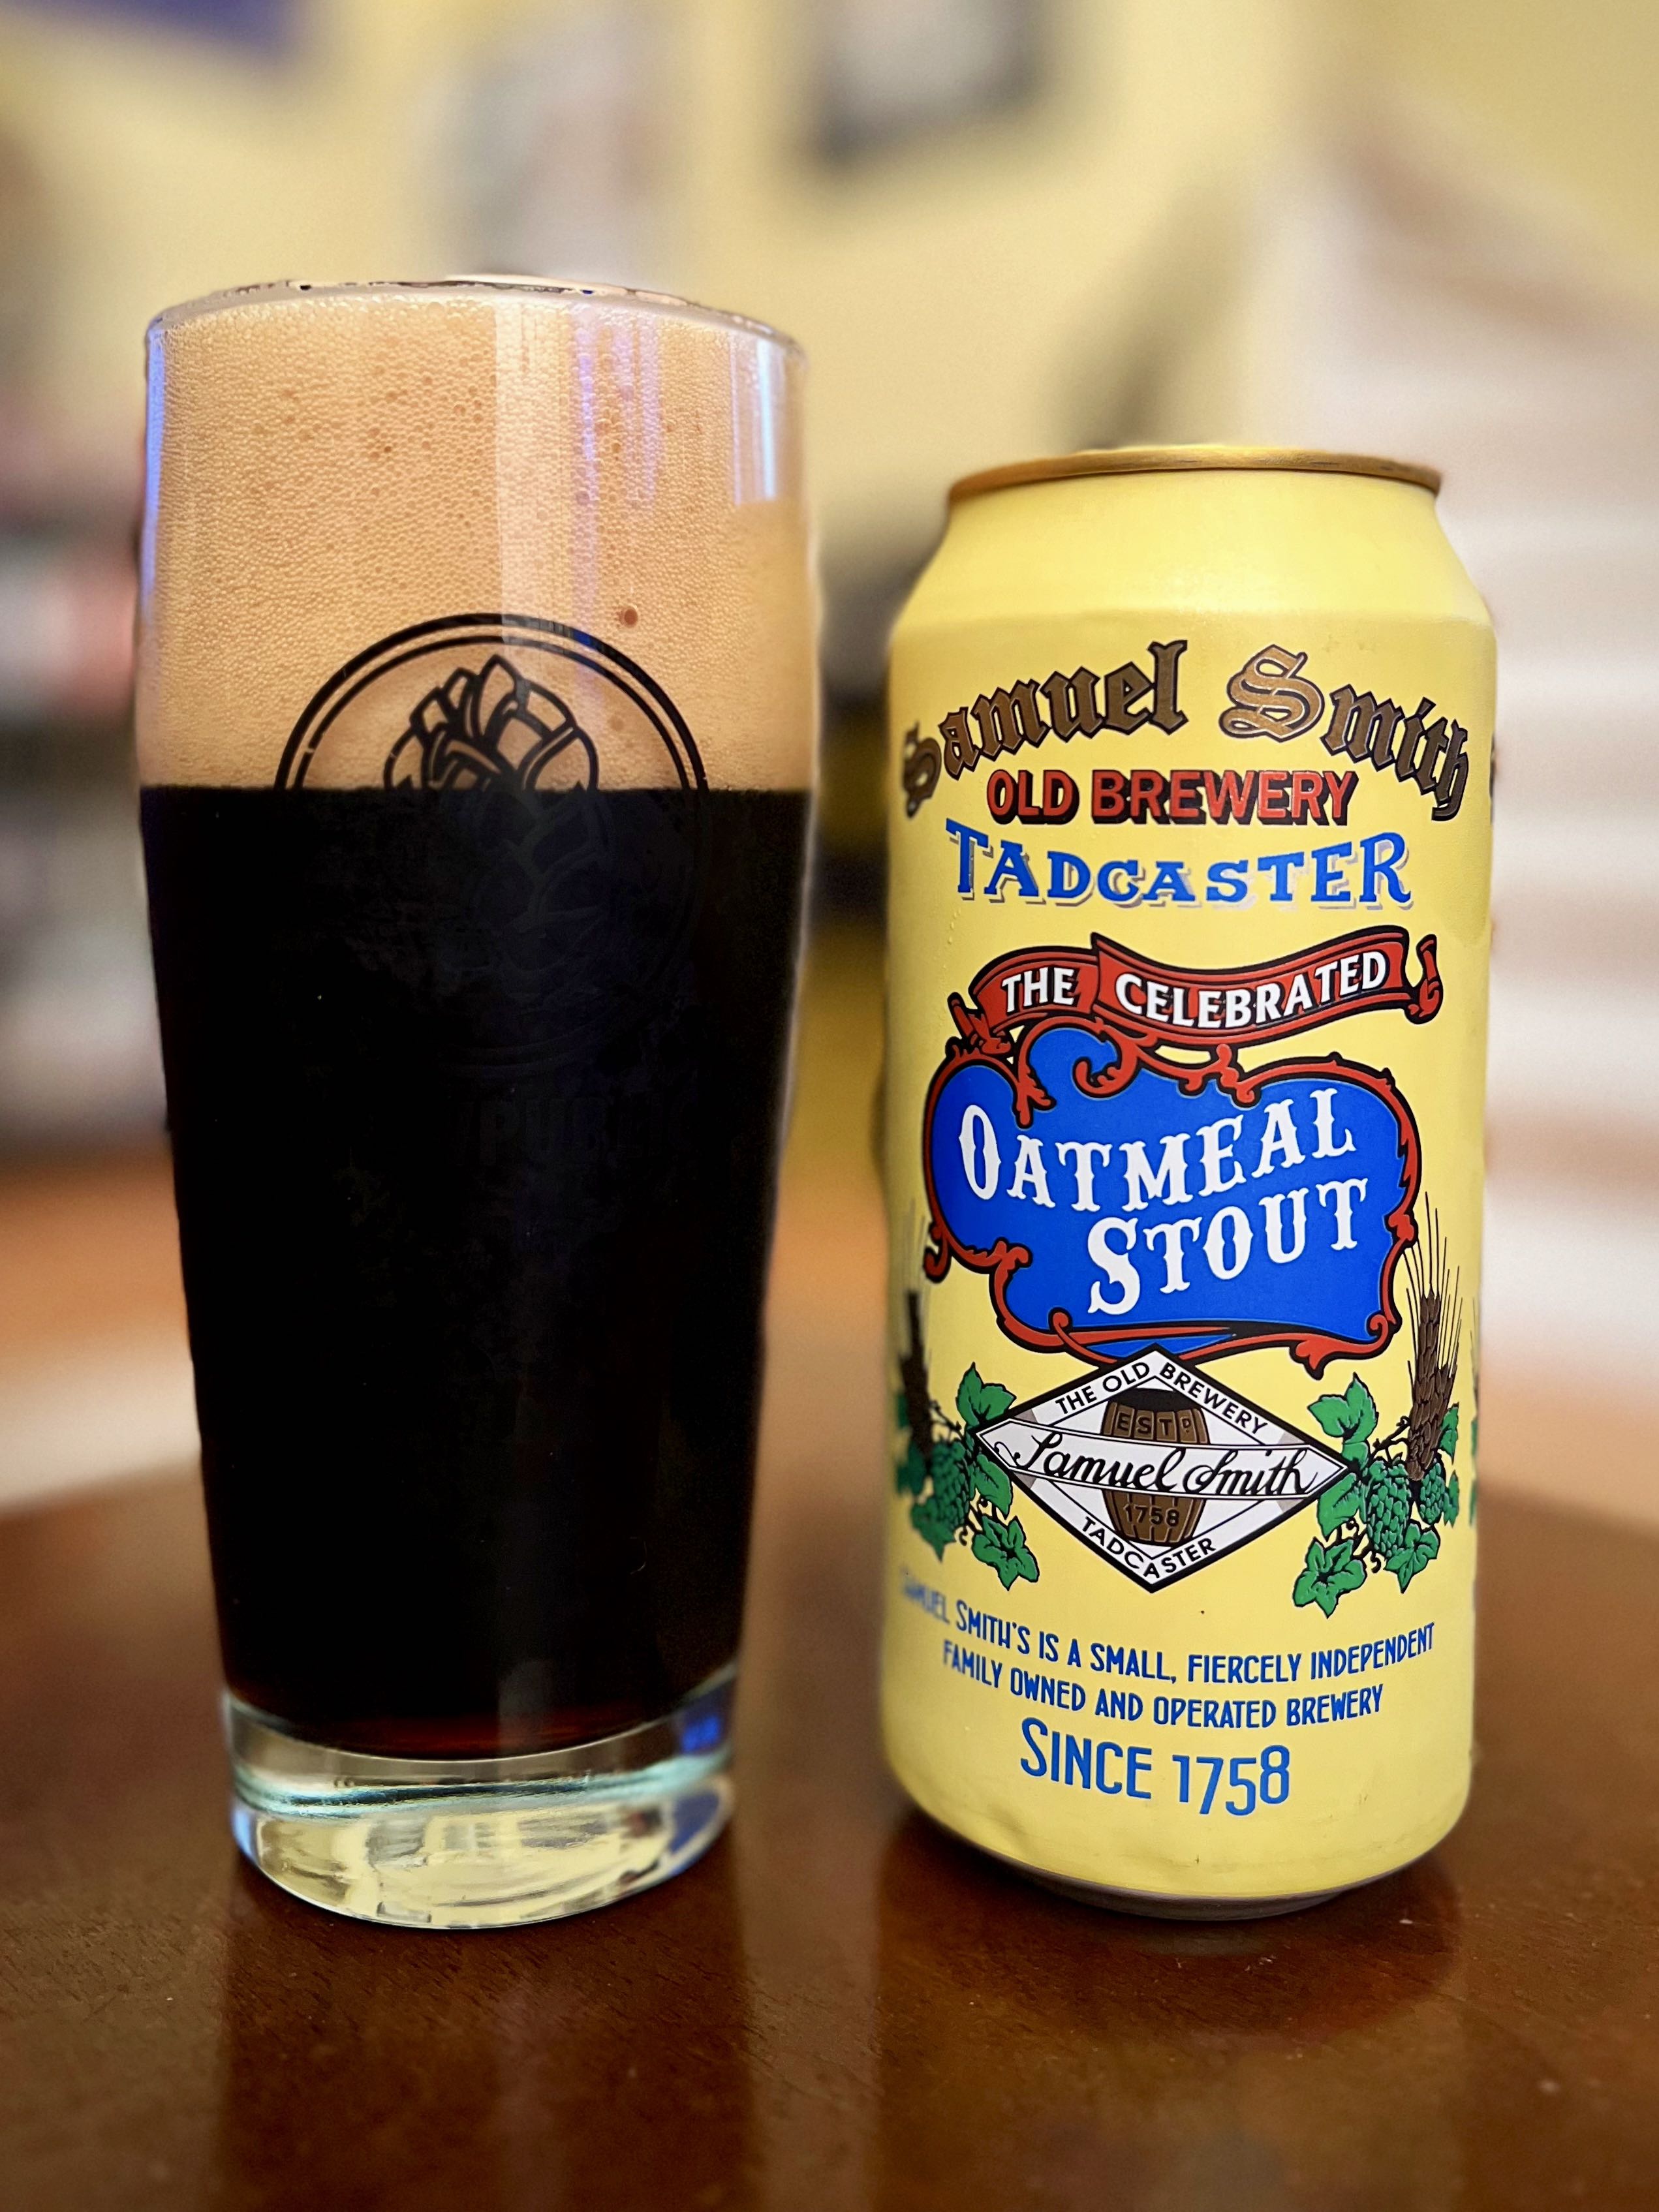 Samuel Smith's Oatmeal Stout is now packaged in 14.9oz aluminum cans for the United States market.